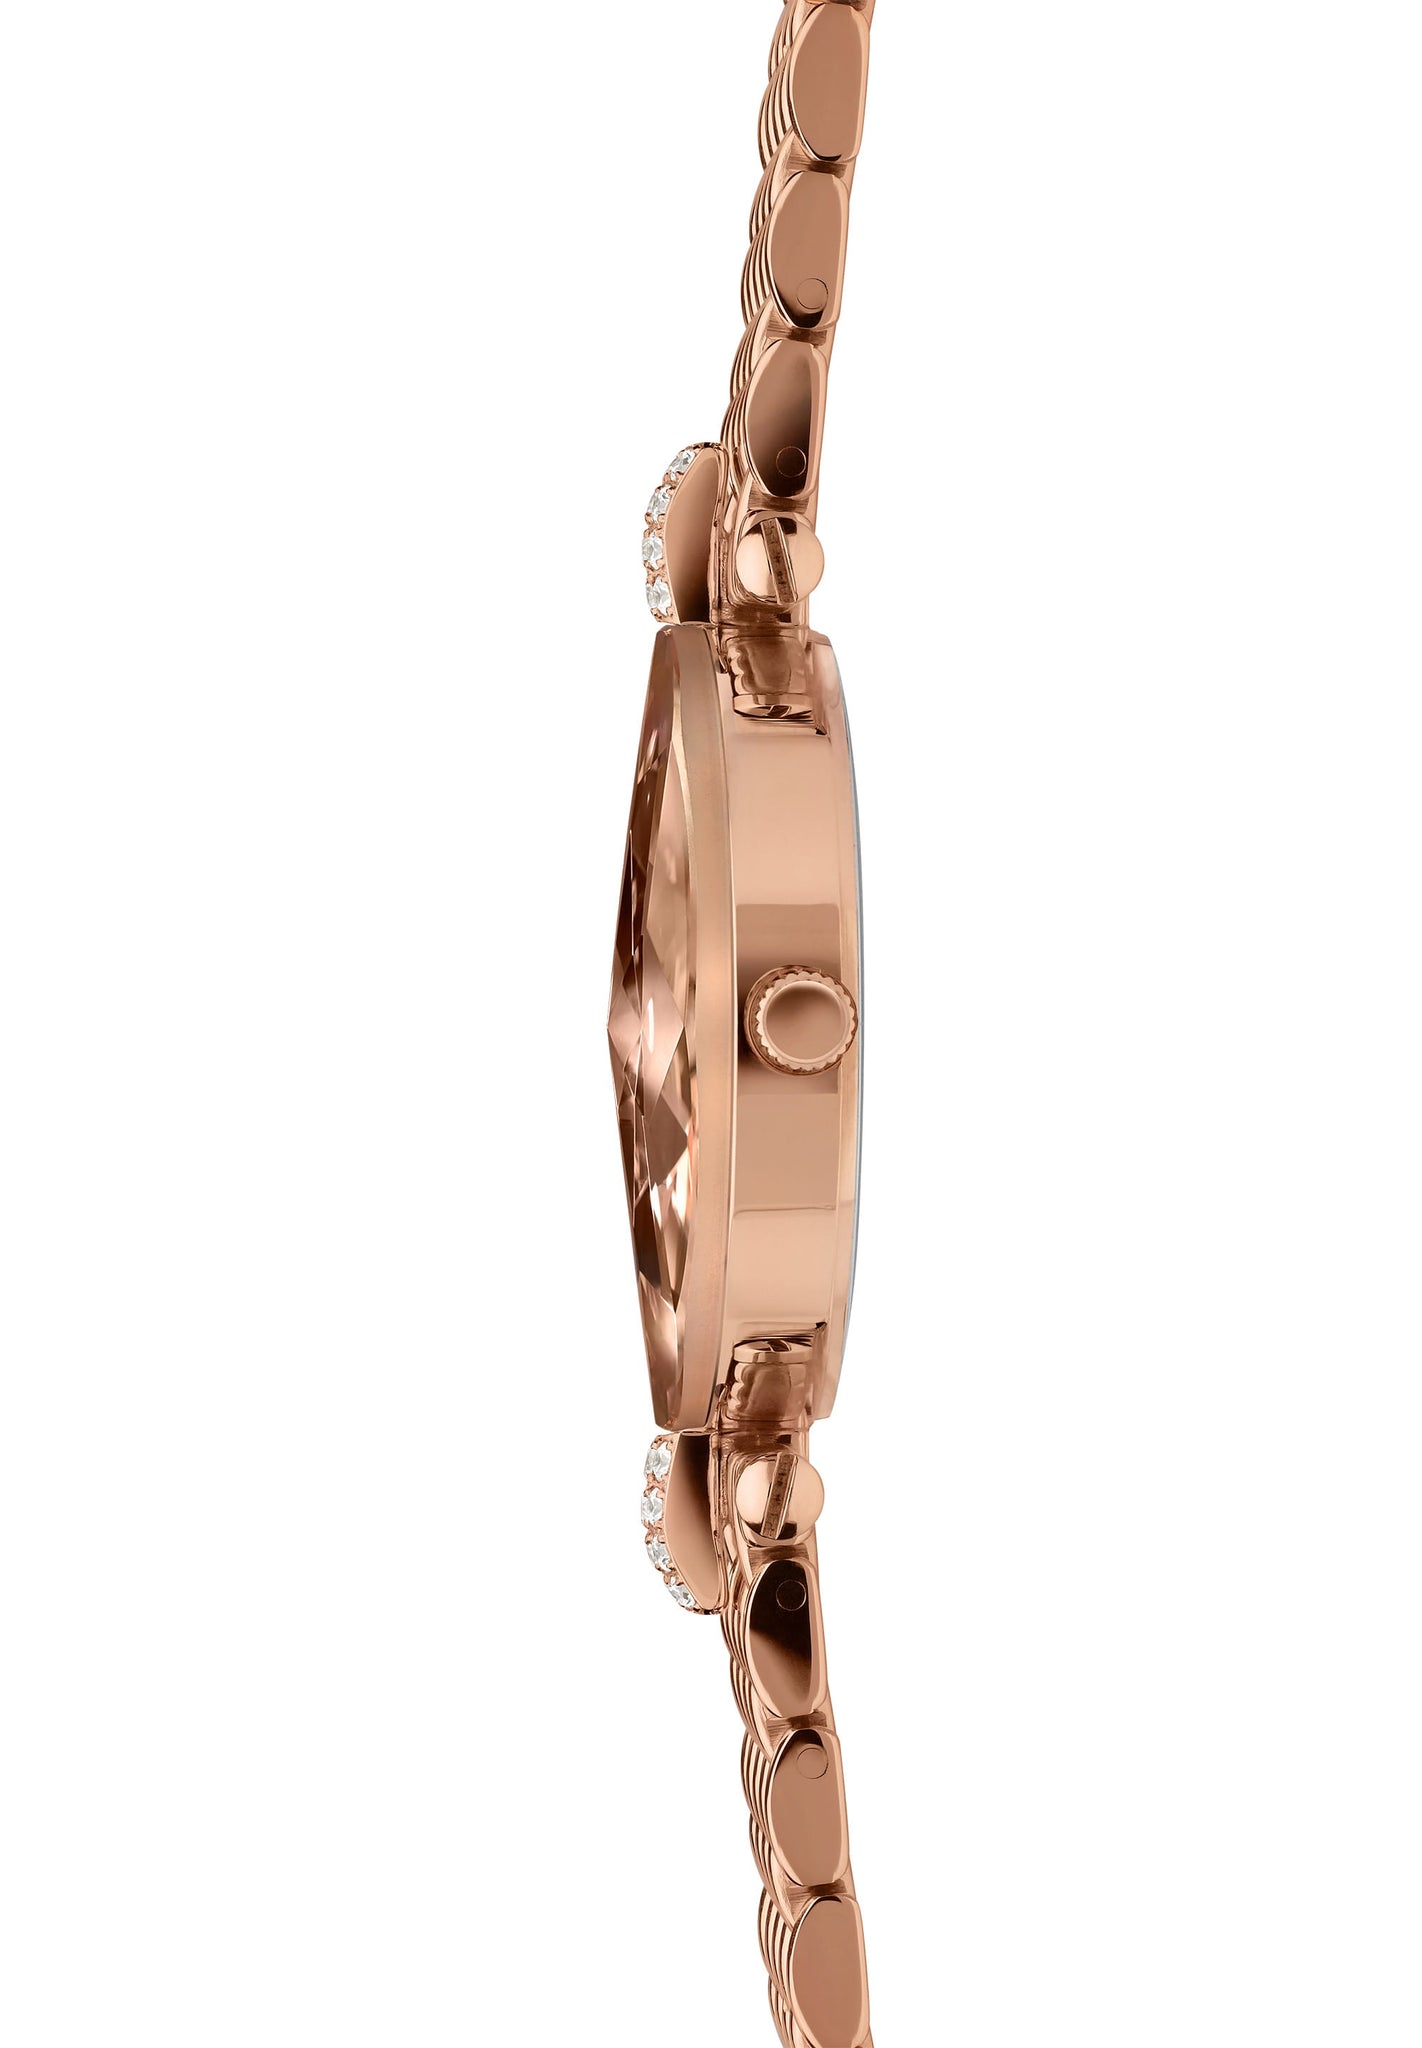 Facet Strass Reloj Mujer Suizo J5.724.M